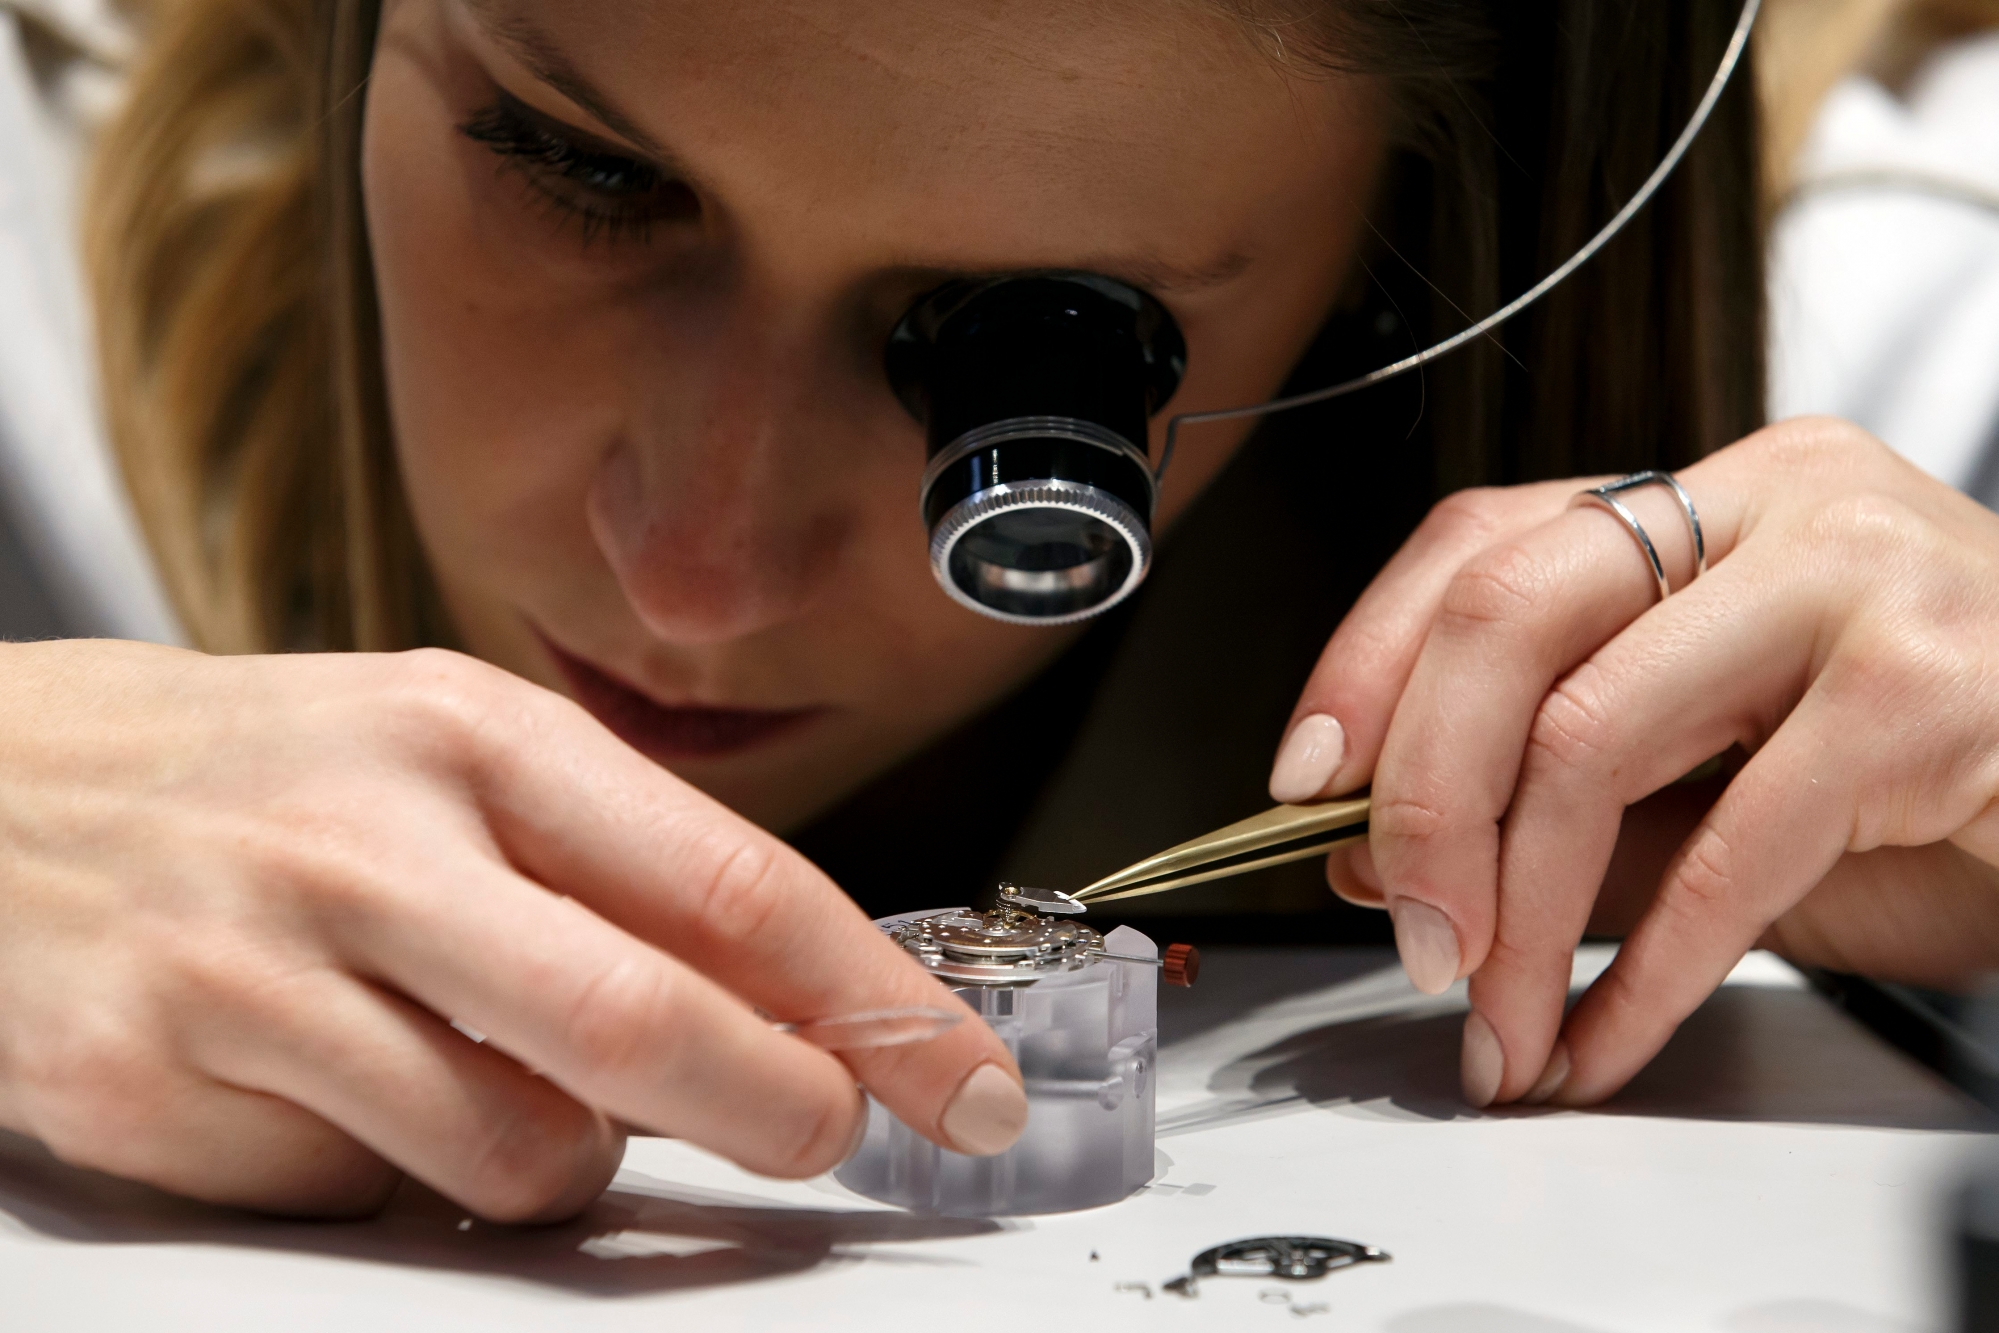 A watchmaker of Jaeger-LeCoultre brand assembles a movement of a watch, during the first day of the 28th edition of the Salon International de la Haute Horlogerie, SIHH, in Geneva, Switzerland, Monday, January 15, 2018. (KEYSTONE/Salvatore Di Nolfi) SWITZERLAND EXHIBITION SIHH 2018